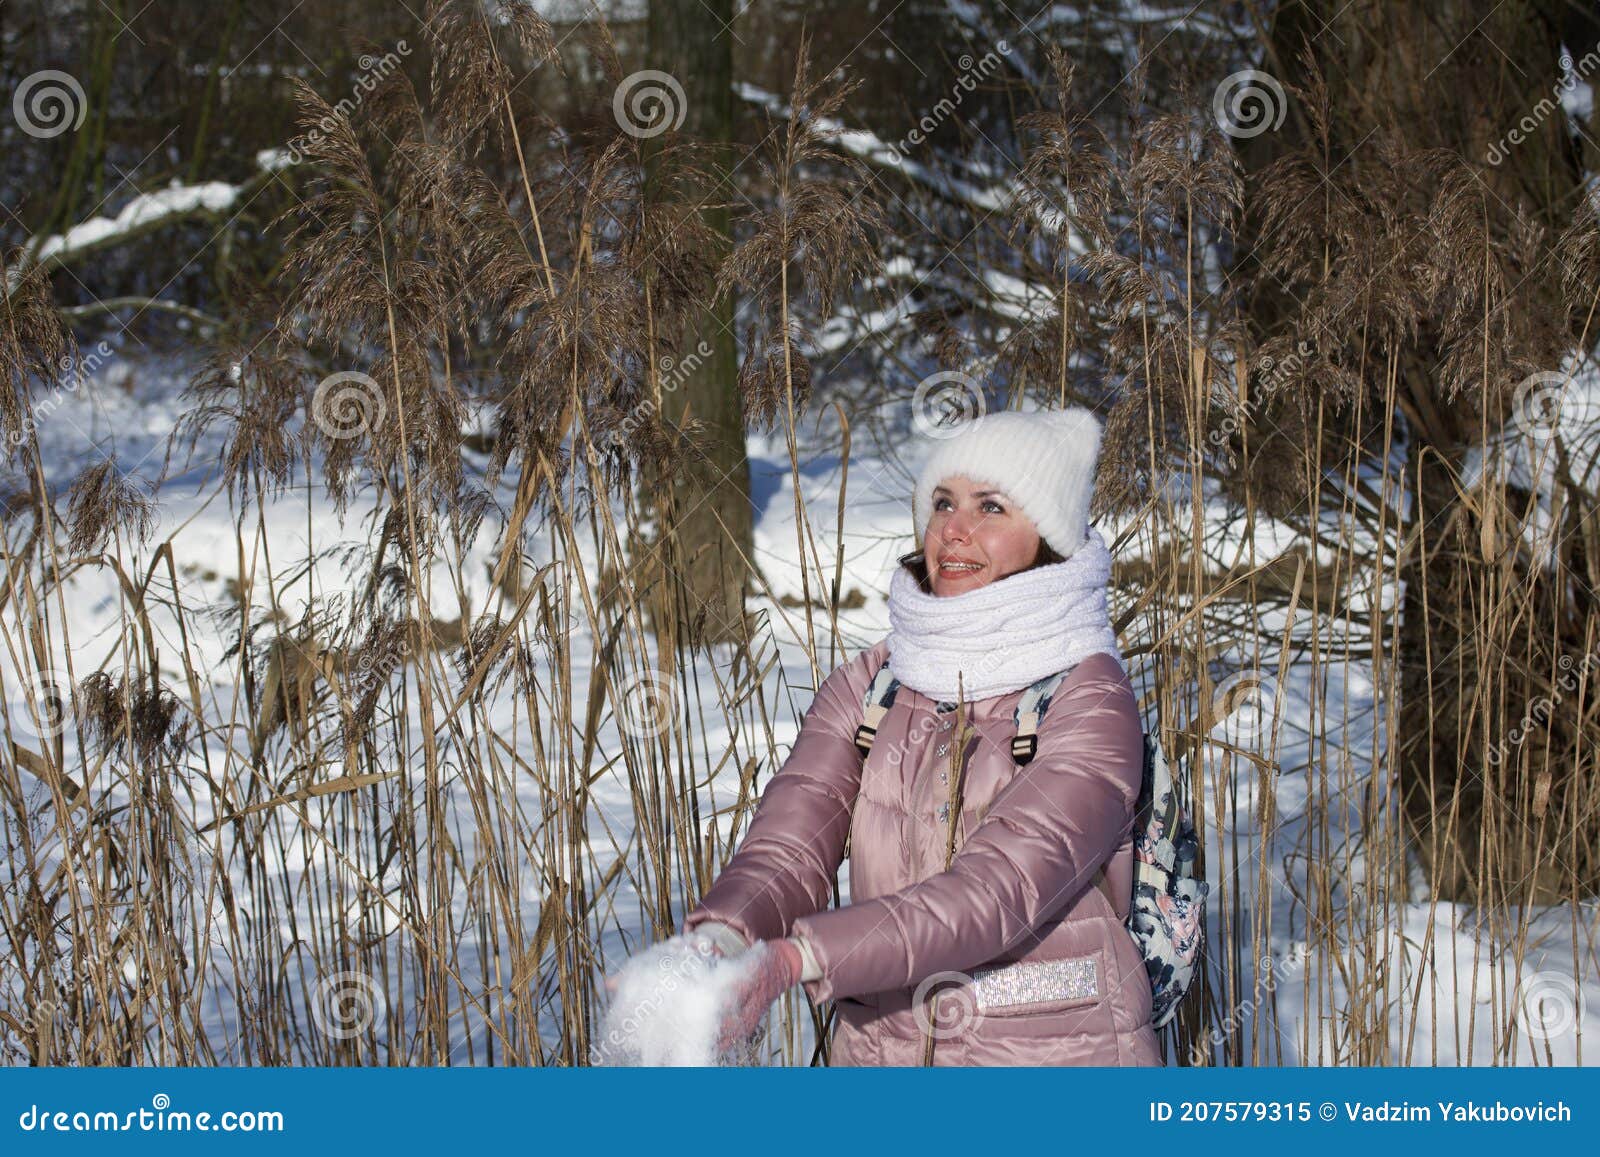 Woman in Winter Clothes on a Walk in the Park. Throws Up a Handful of Snow  Stock Image - Image of lifestyle, girl: 207579315